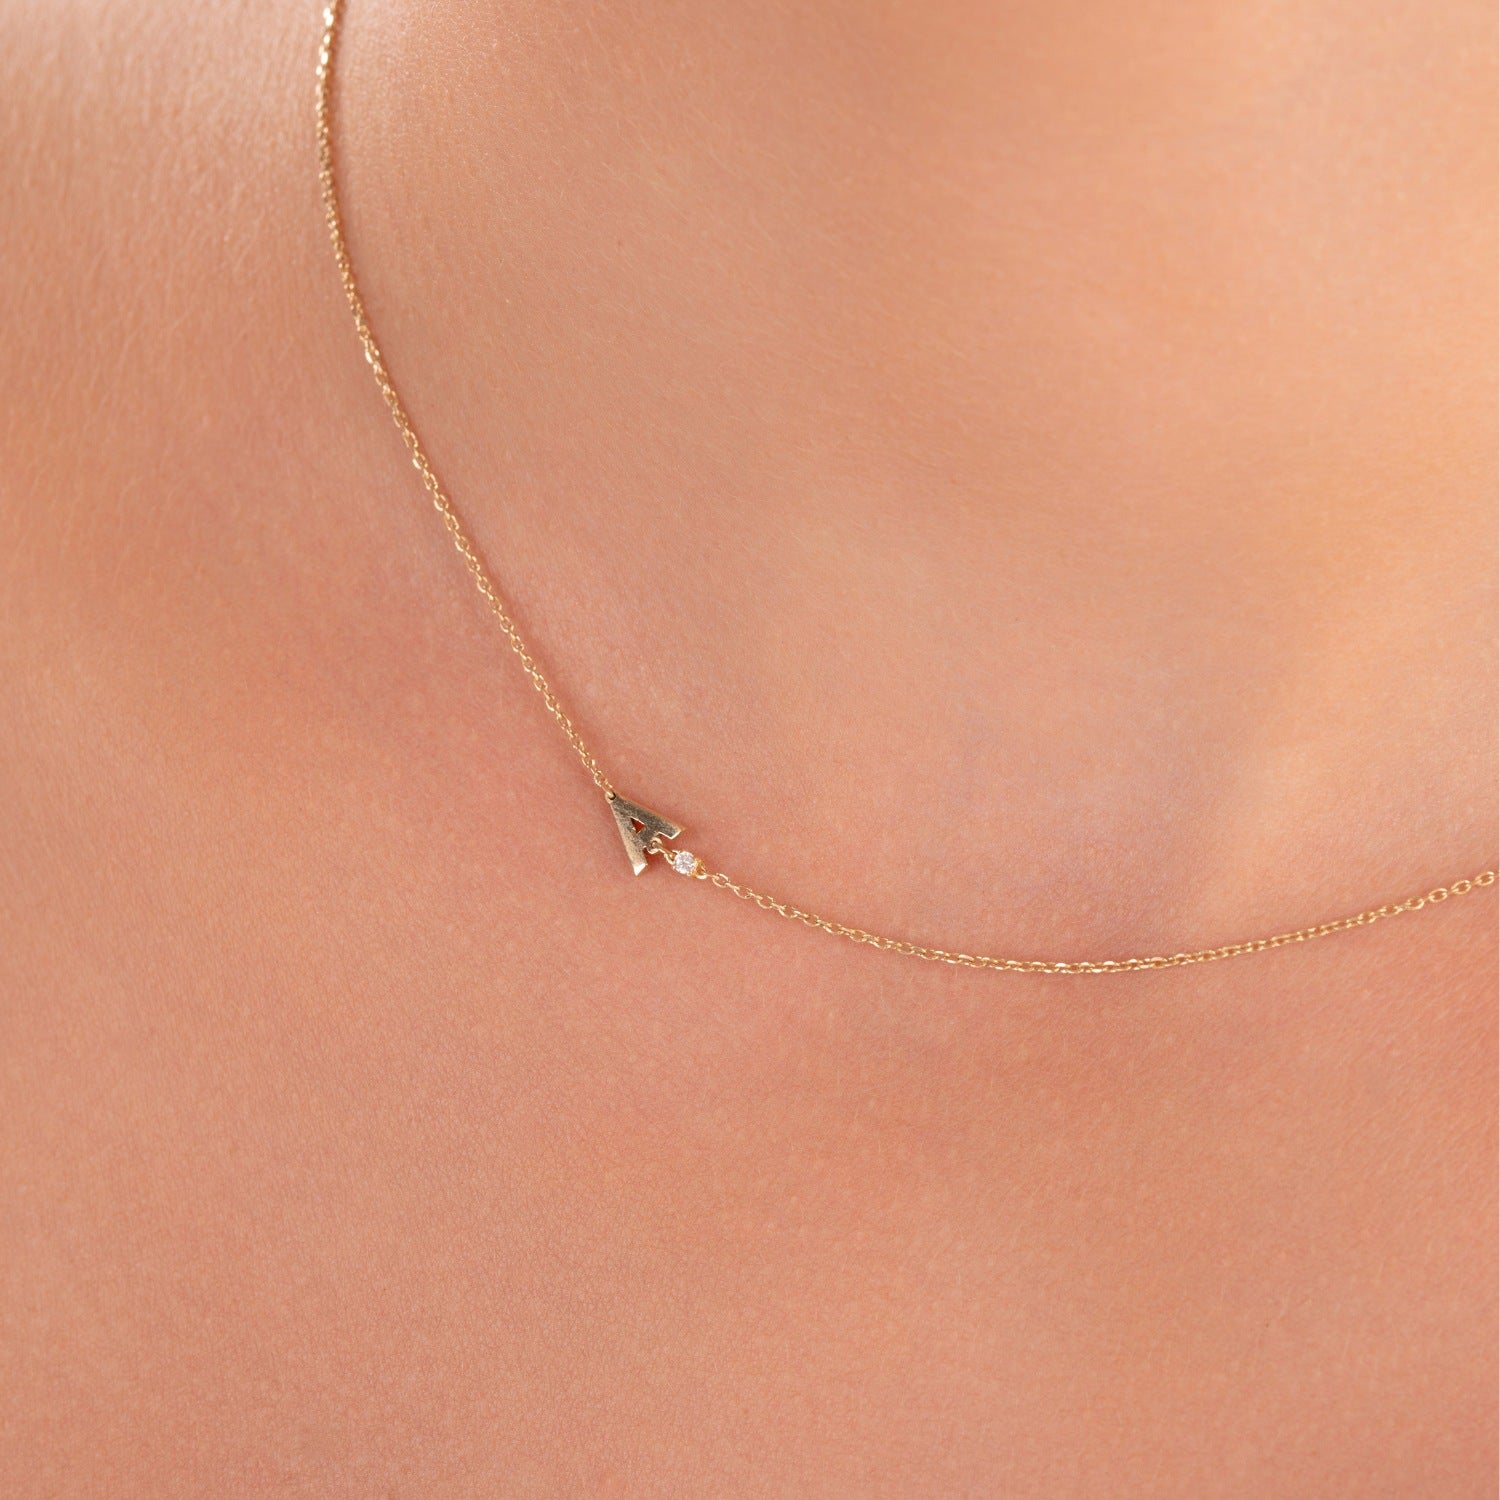 Asymmetrical Initial Necklace with Diamond